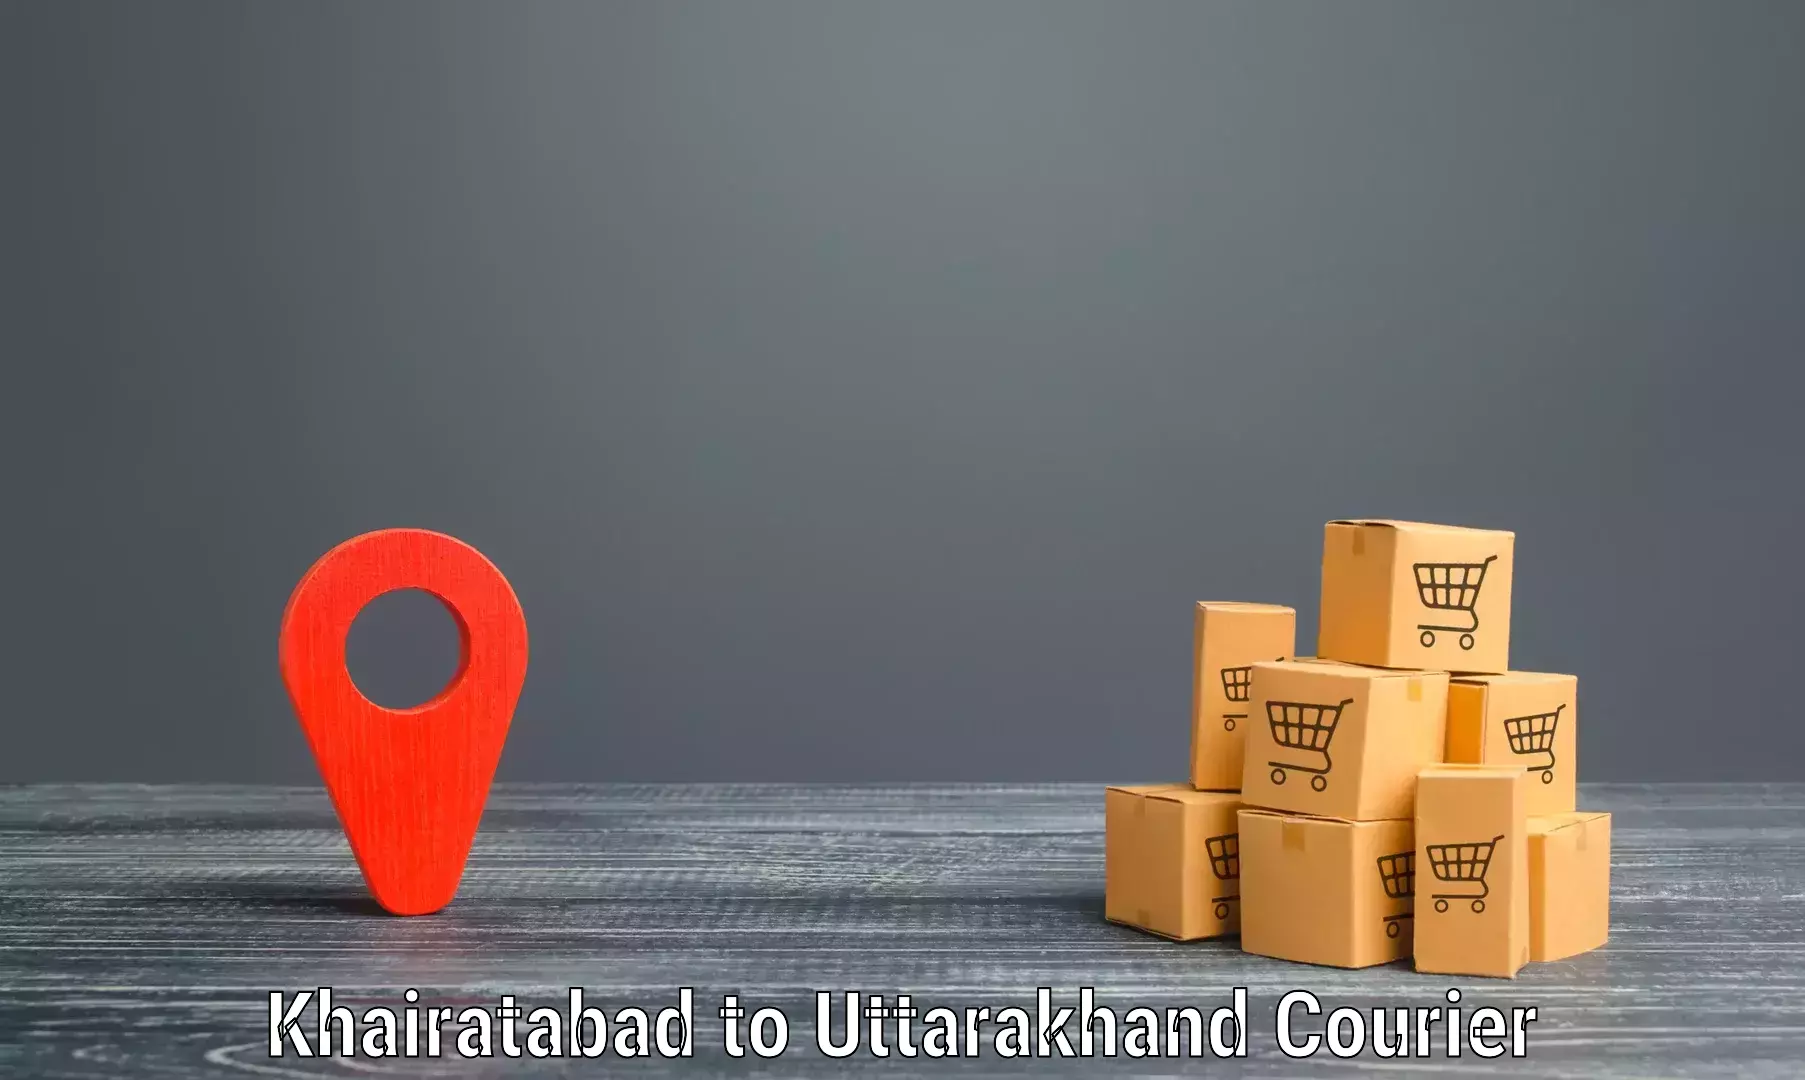 Subscription-based courier Khairatabad to Champawat